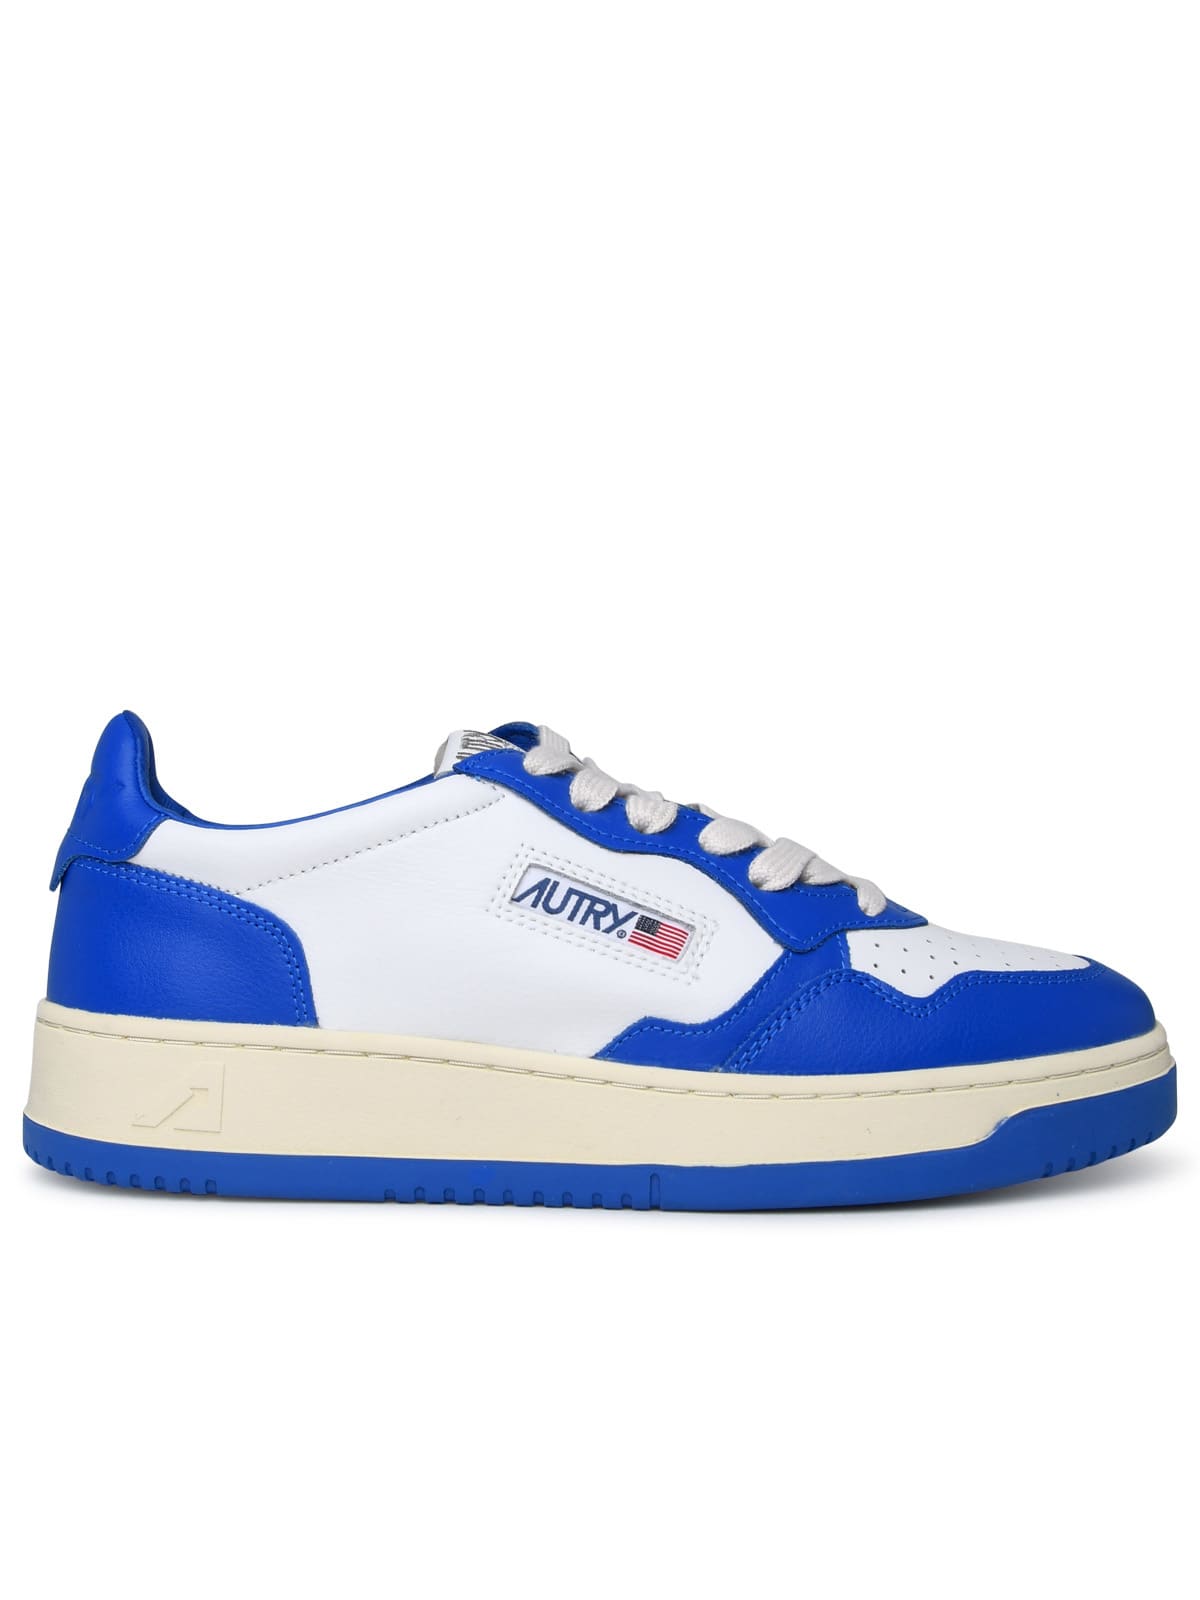 AUTRY BLUE AND WHITE LEATHER MEDALIST SNEAKERS